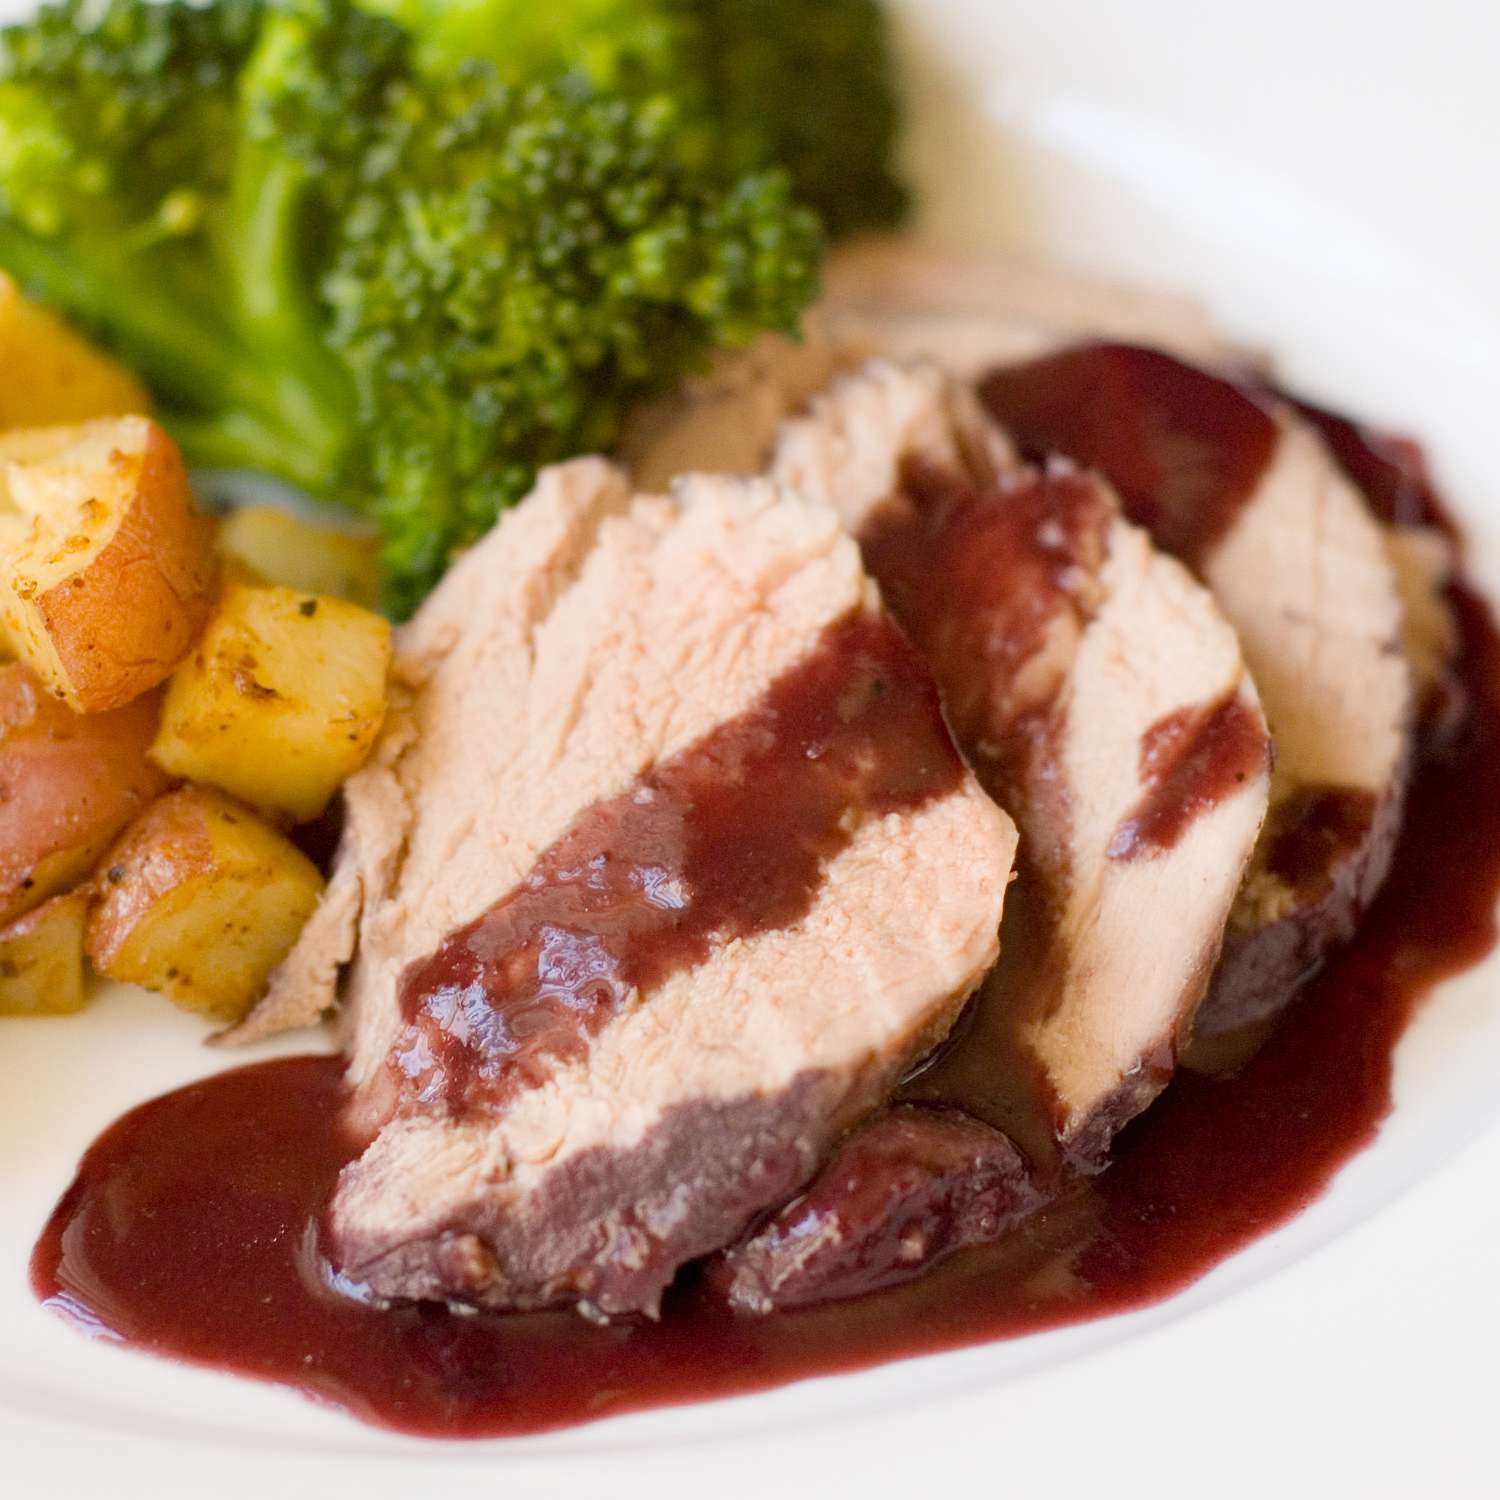 close up view of Burgundy Pork Tenderloin with sauce, served with broccoli and potatoes on a white plate